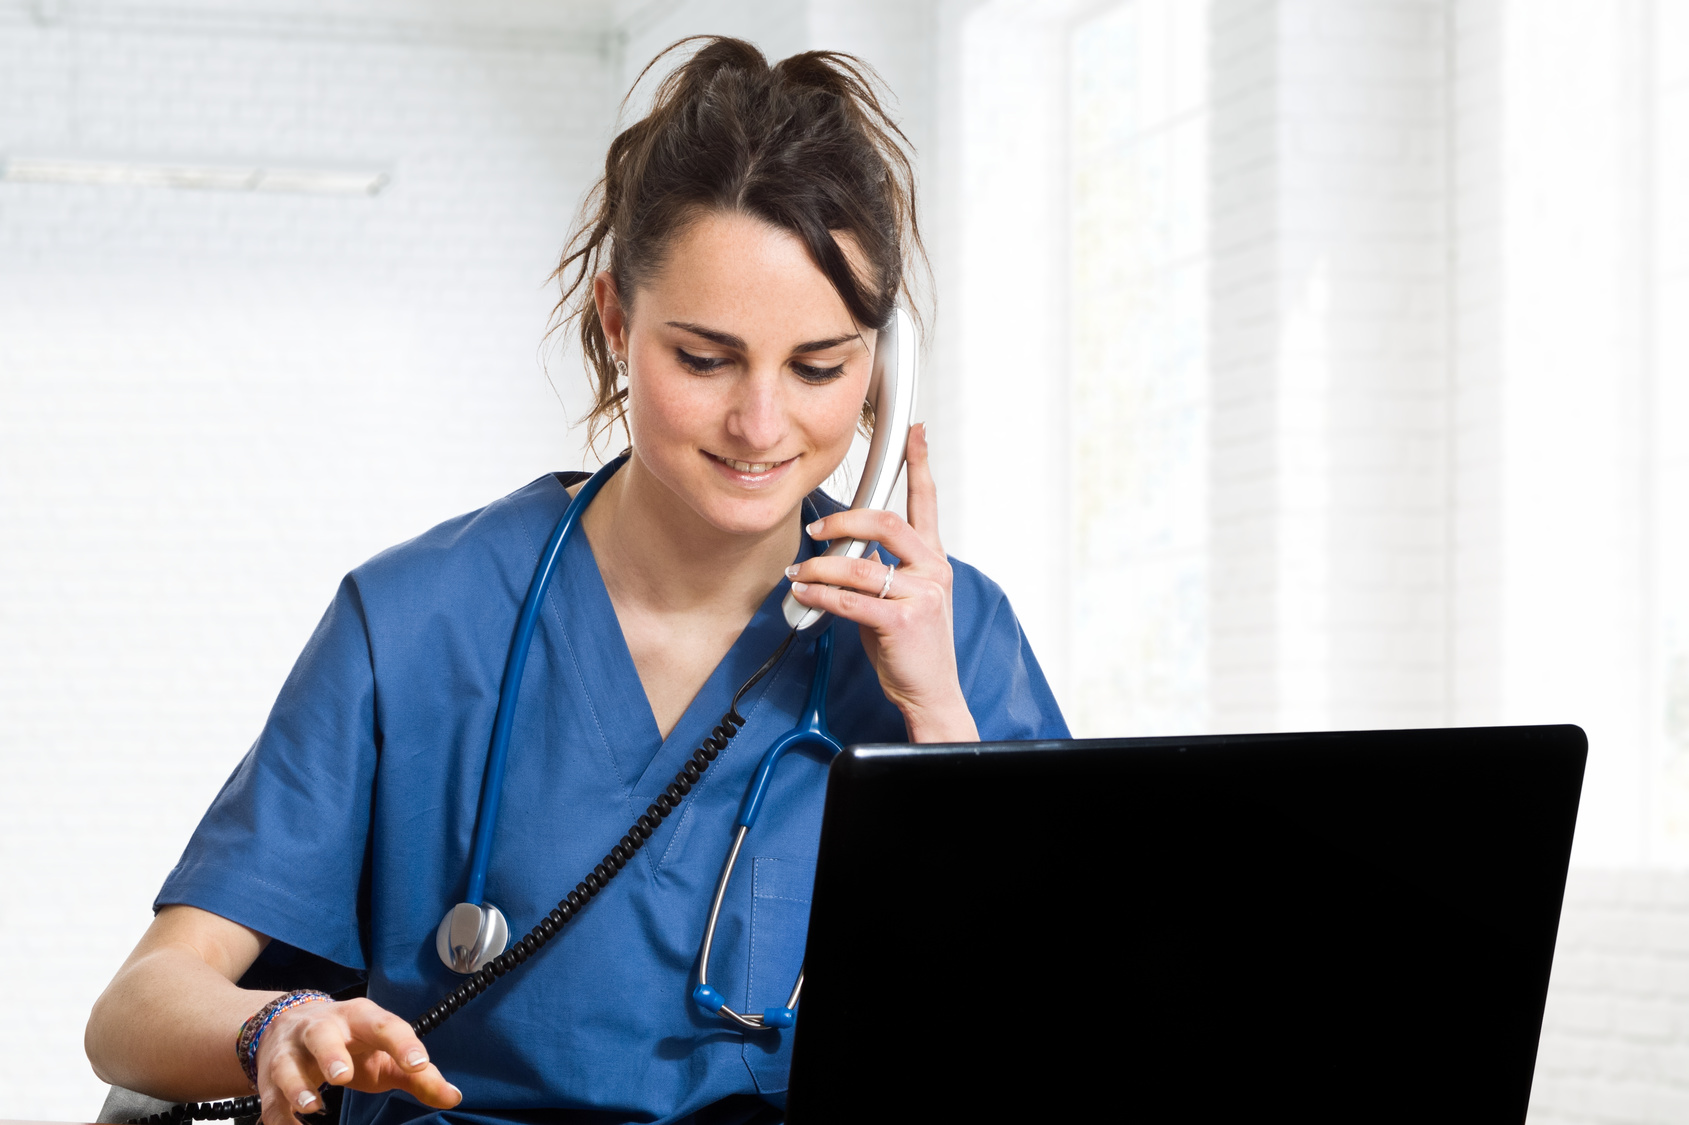 a woman in scrubs is talking on the phone while using a laptop